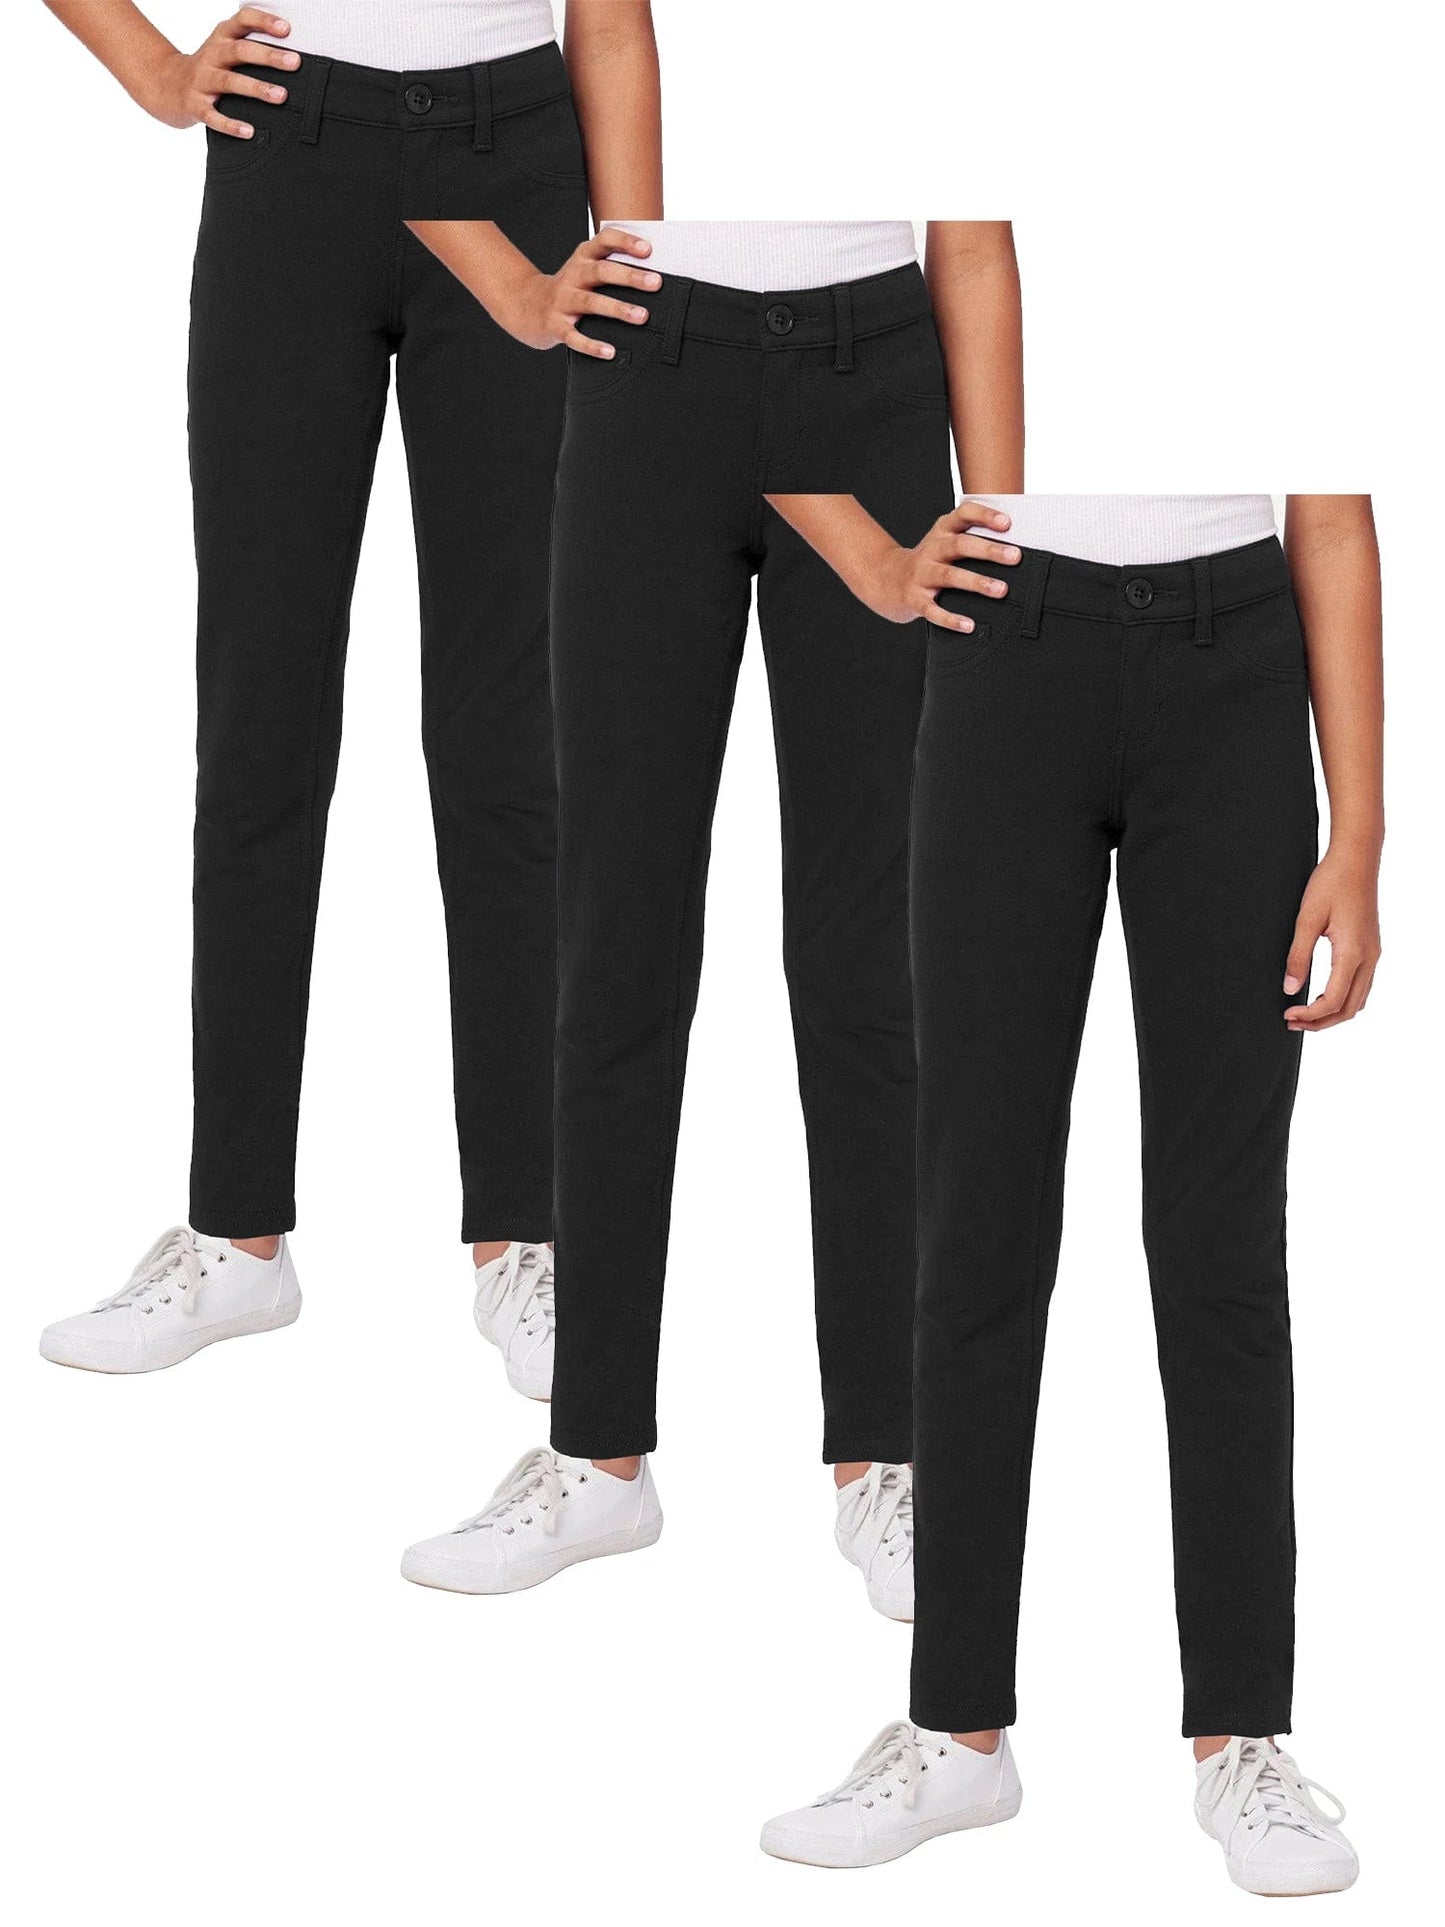 Girl's (3-PACK) Stretch Pencil Skinny Uniform Pants - GalaxybyHarvic